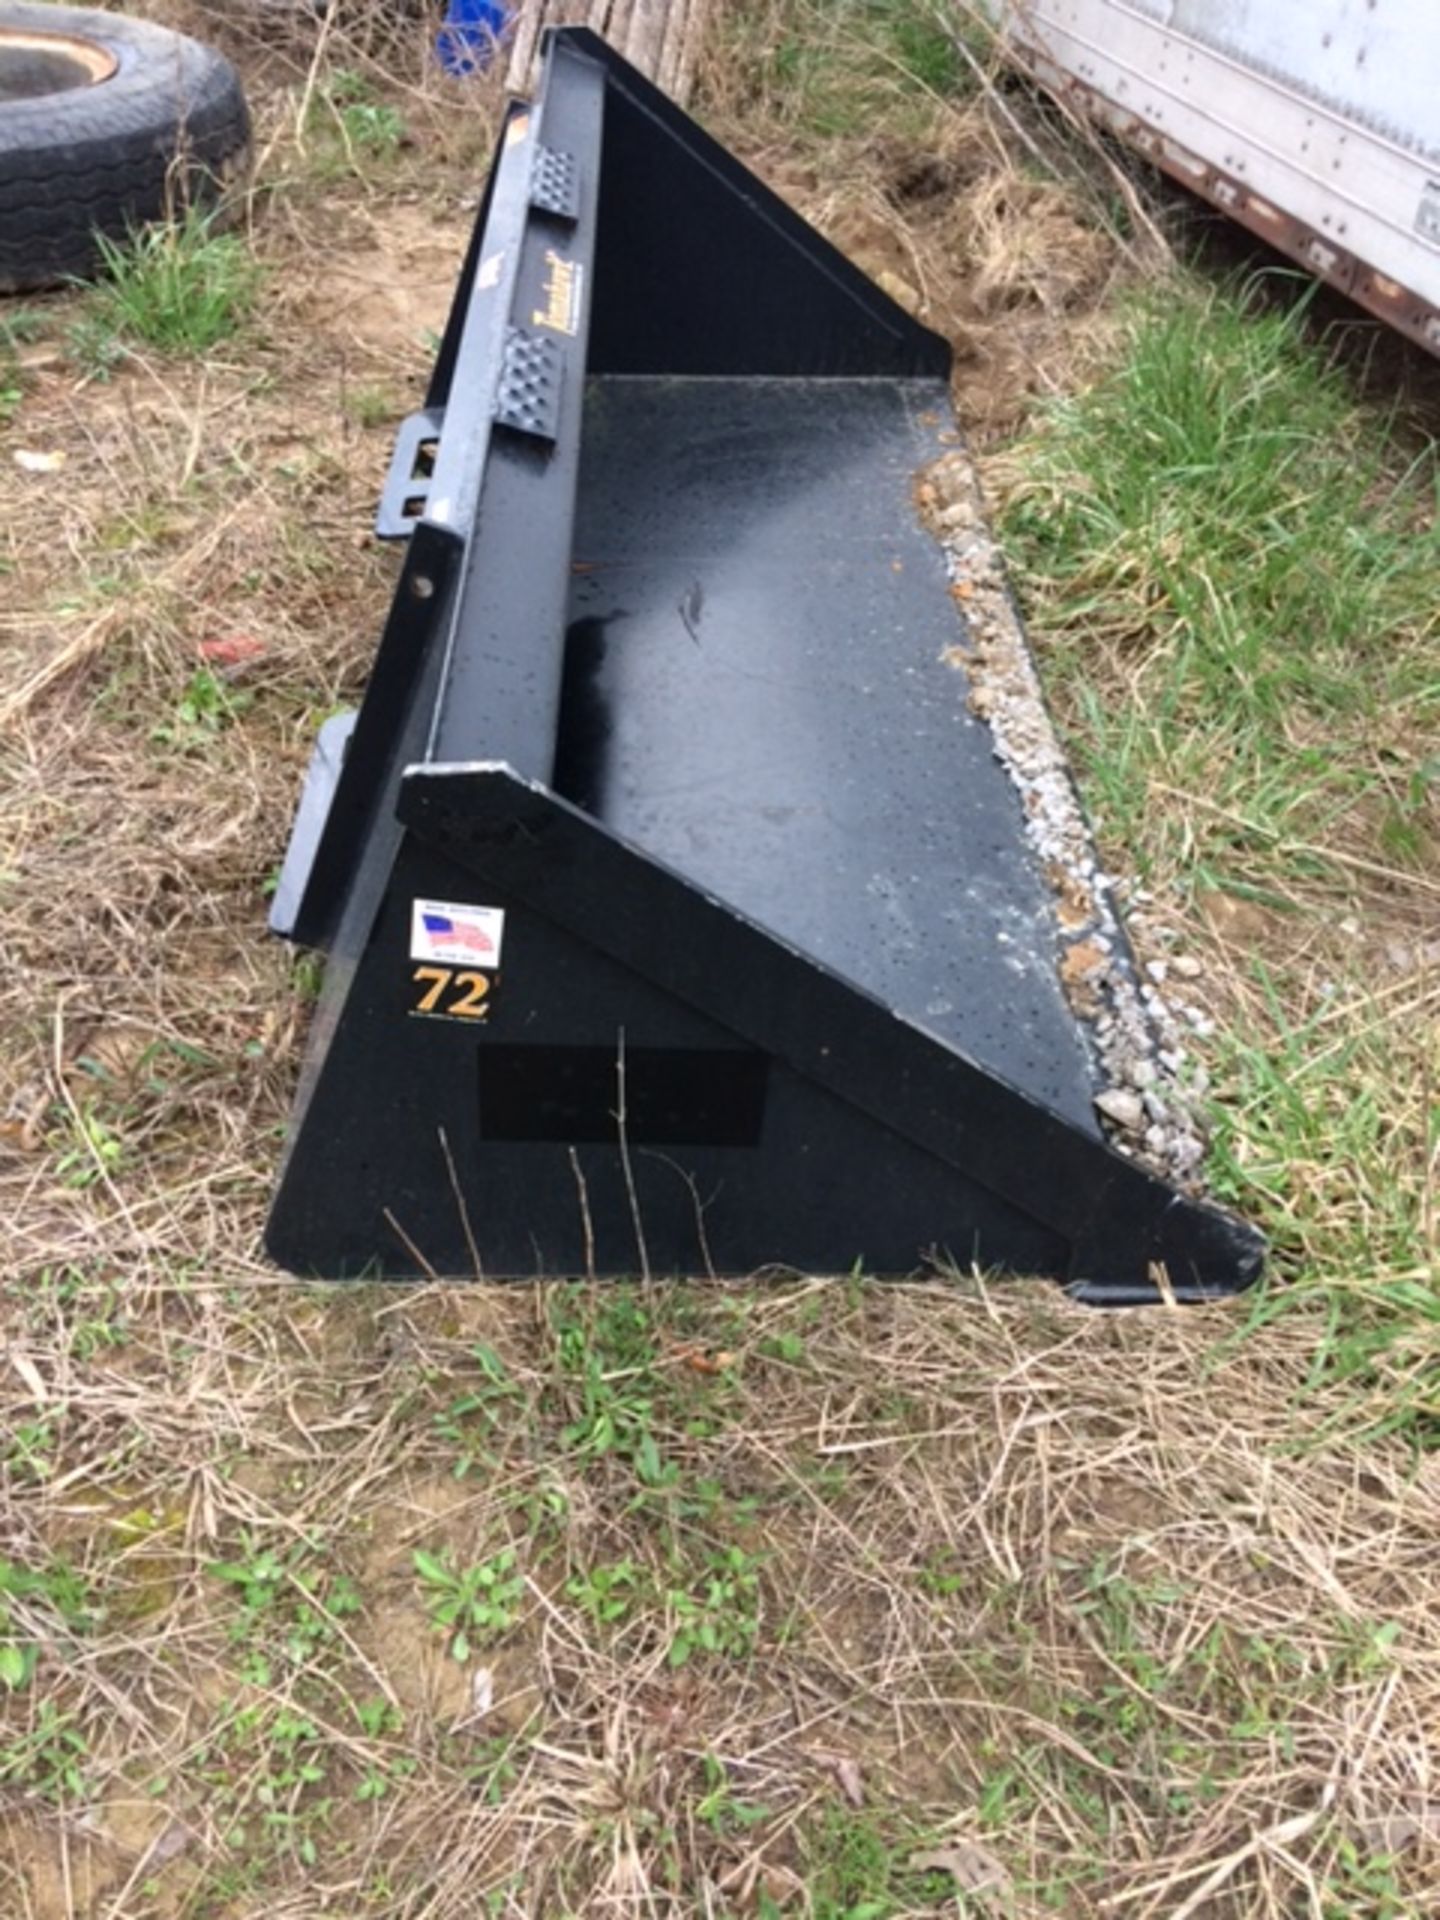 New 72" Skid Steer Bucket, Universal Attachment - Image 2 of 3